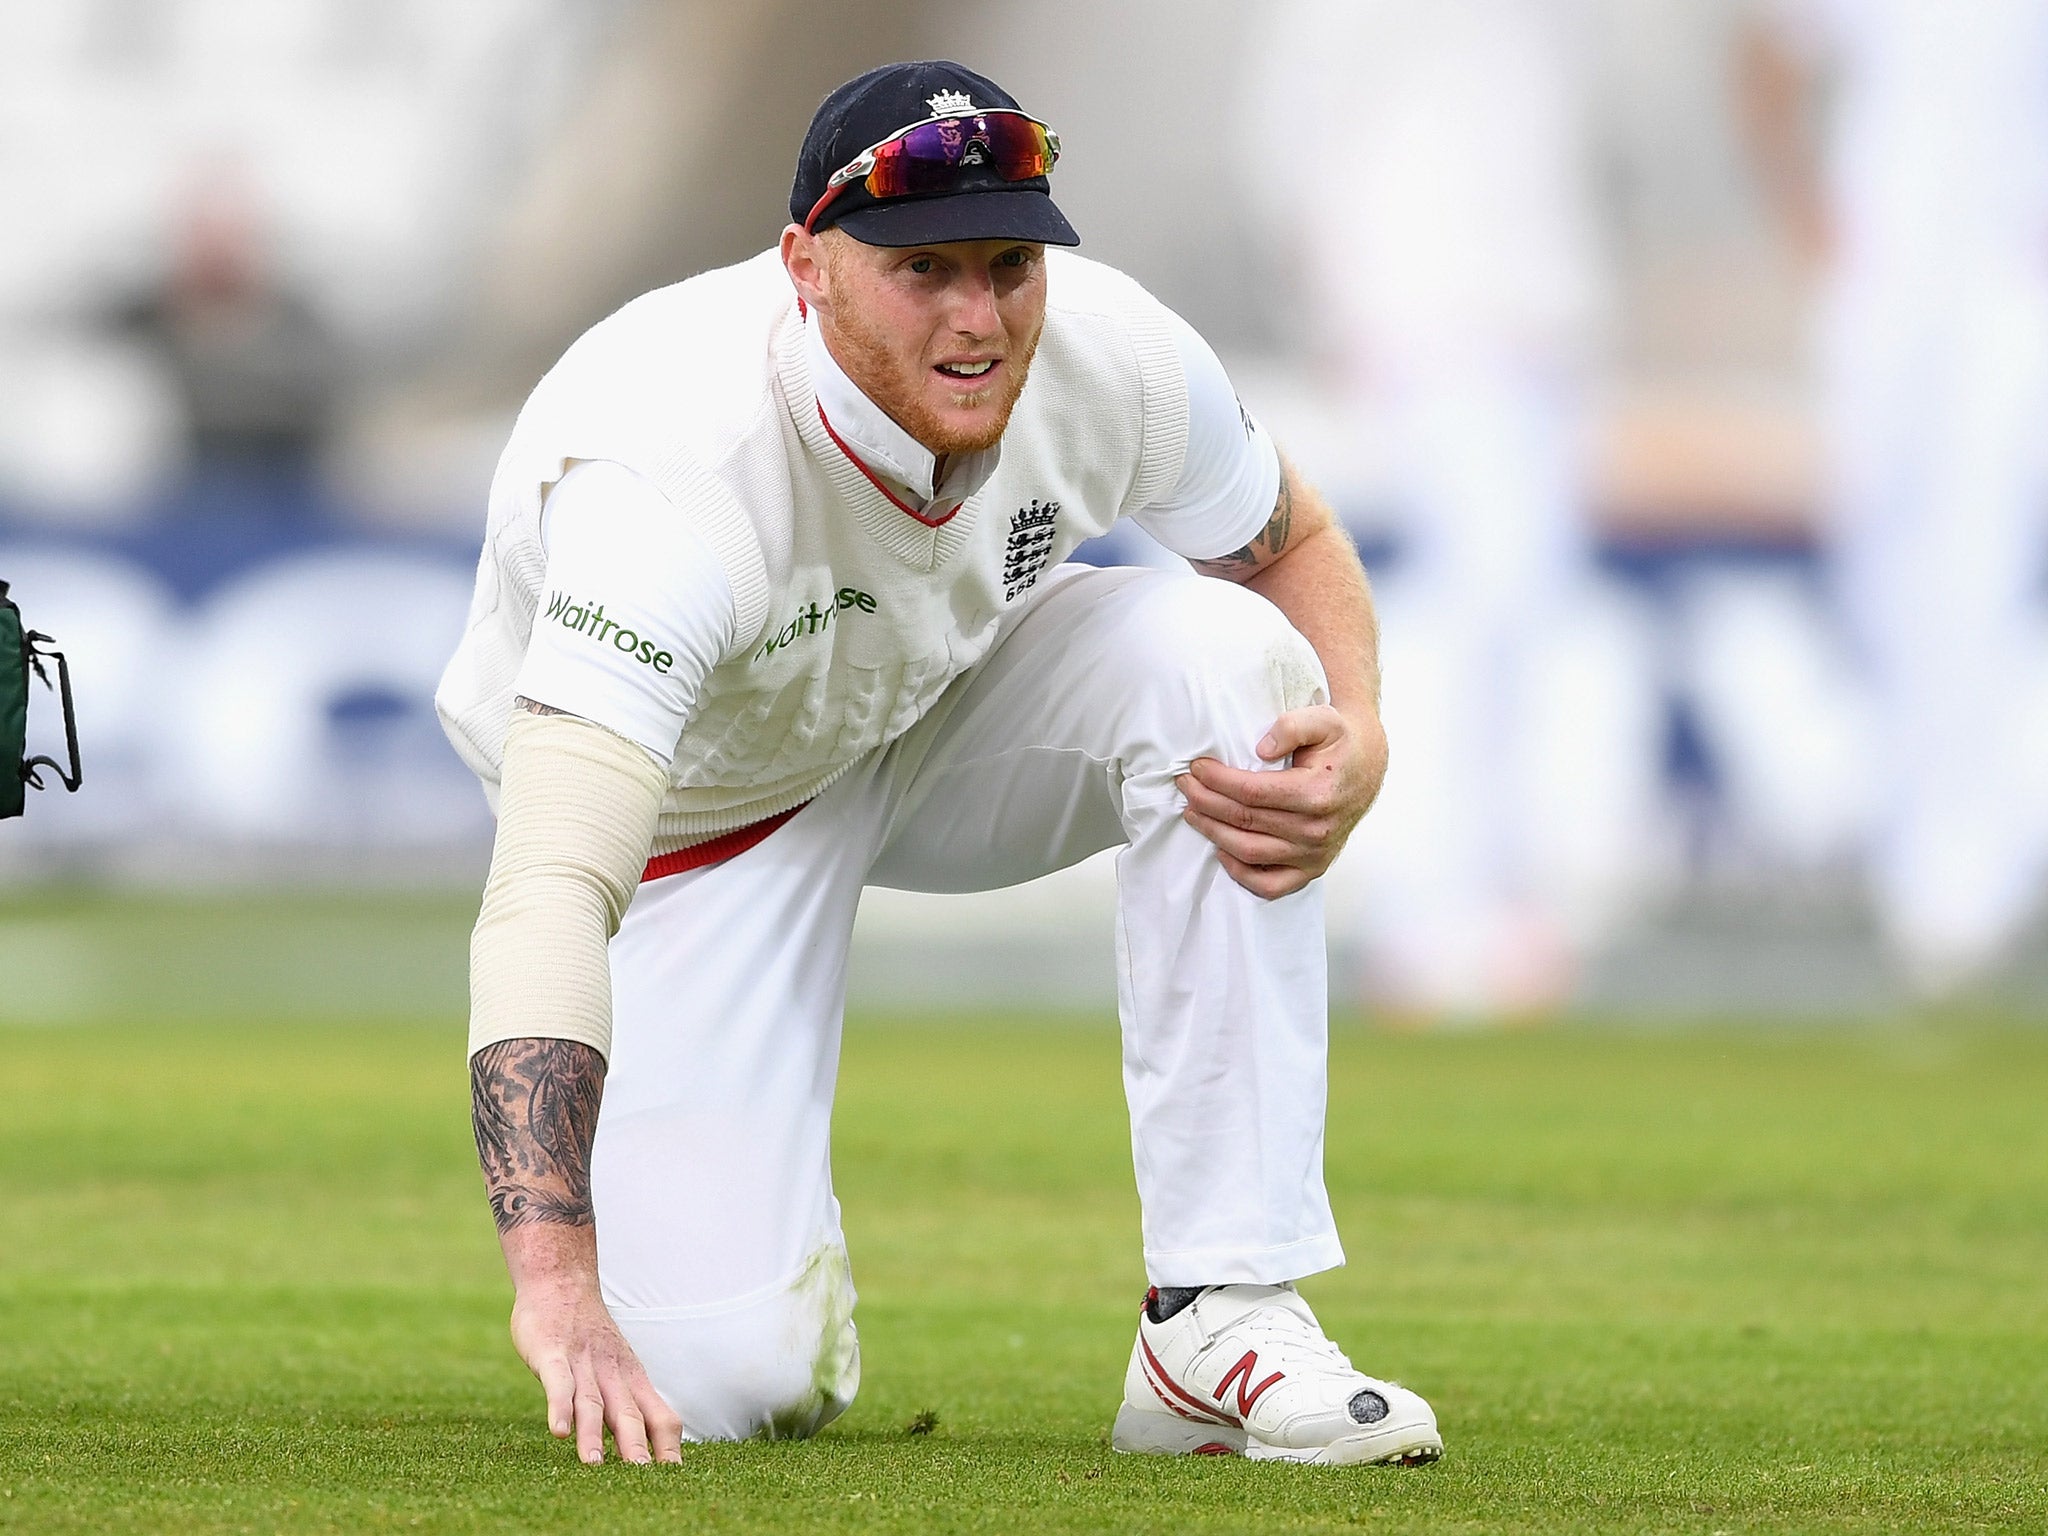 Ben Stokes will go under the knife in the coming days after hurting his knee playing against Sri Lanka